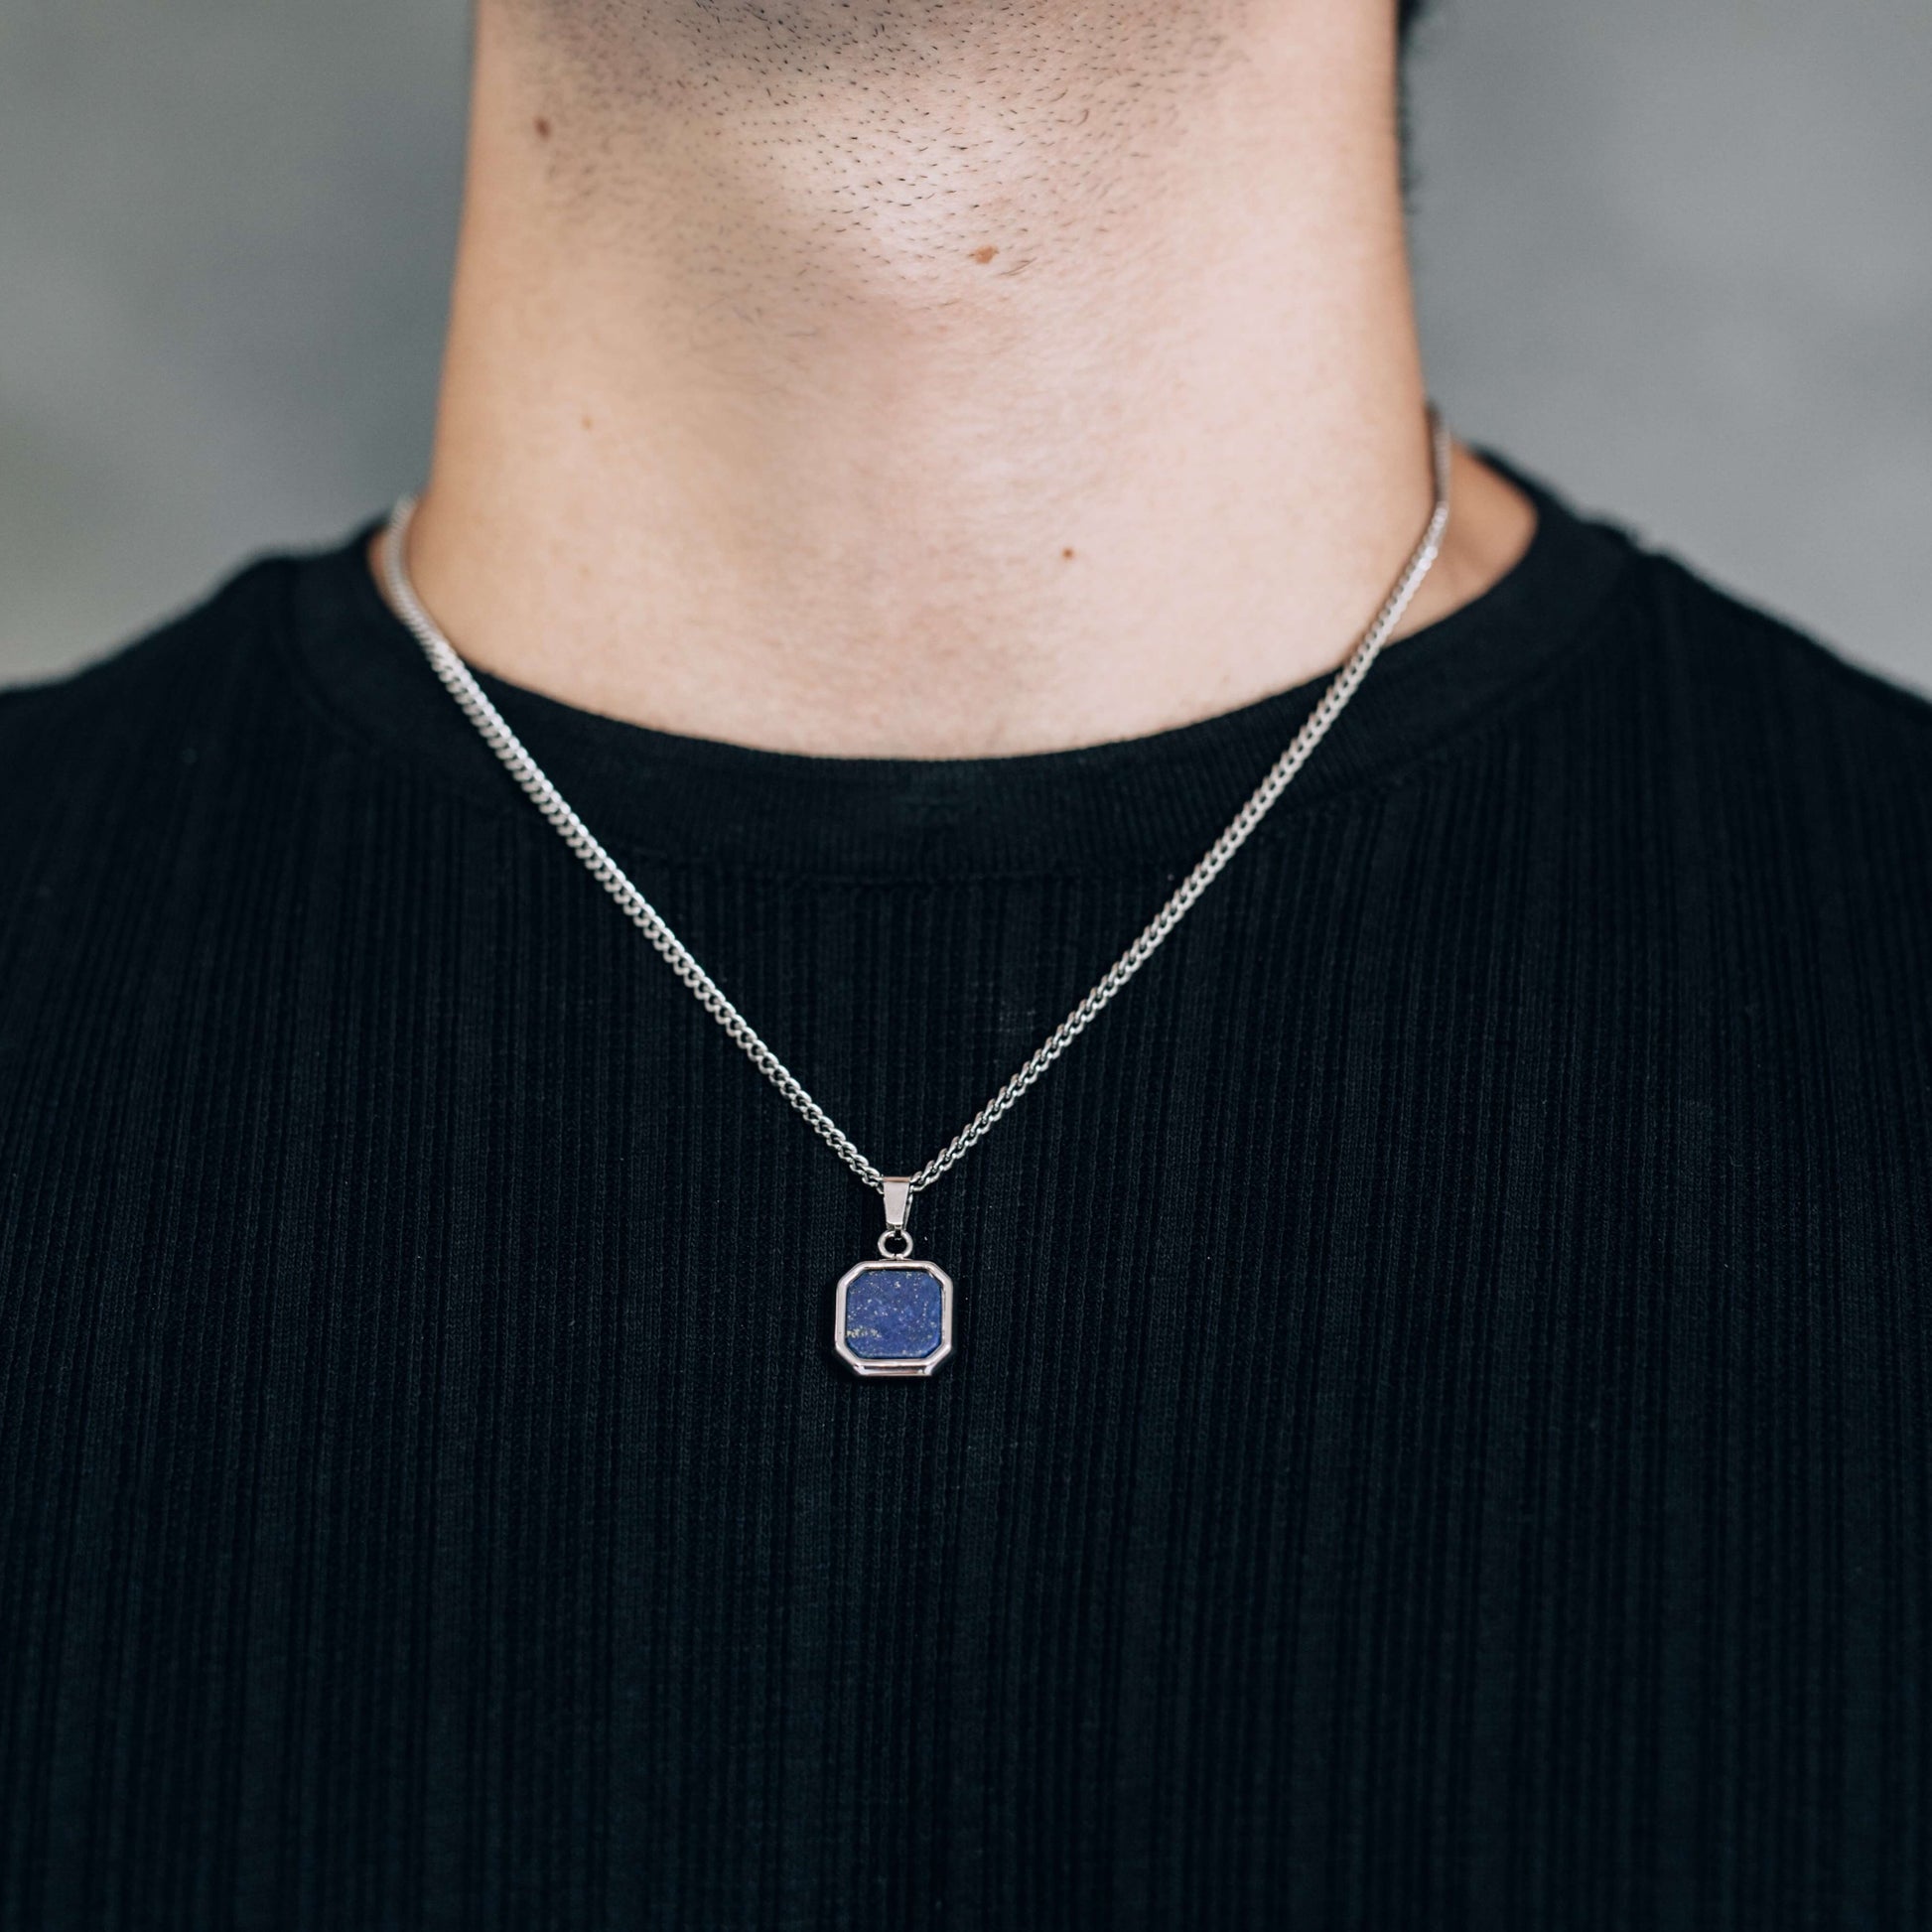 Silver Black, Blue or White Square Pendant Necklace 3mm Curb Chain For Men or Women - Necklace - Boutique Wear RENN